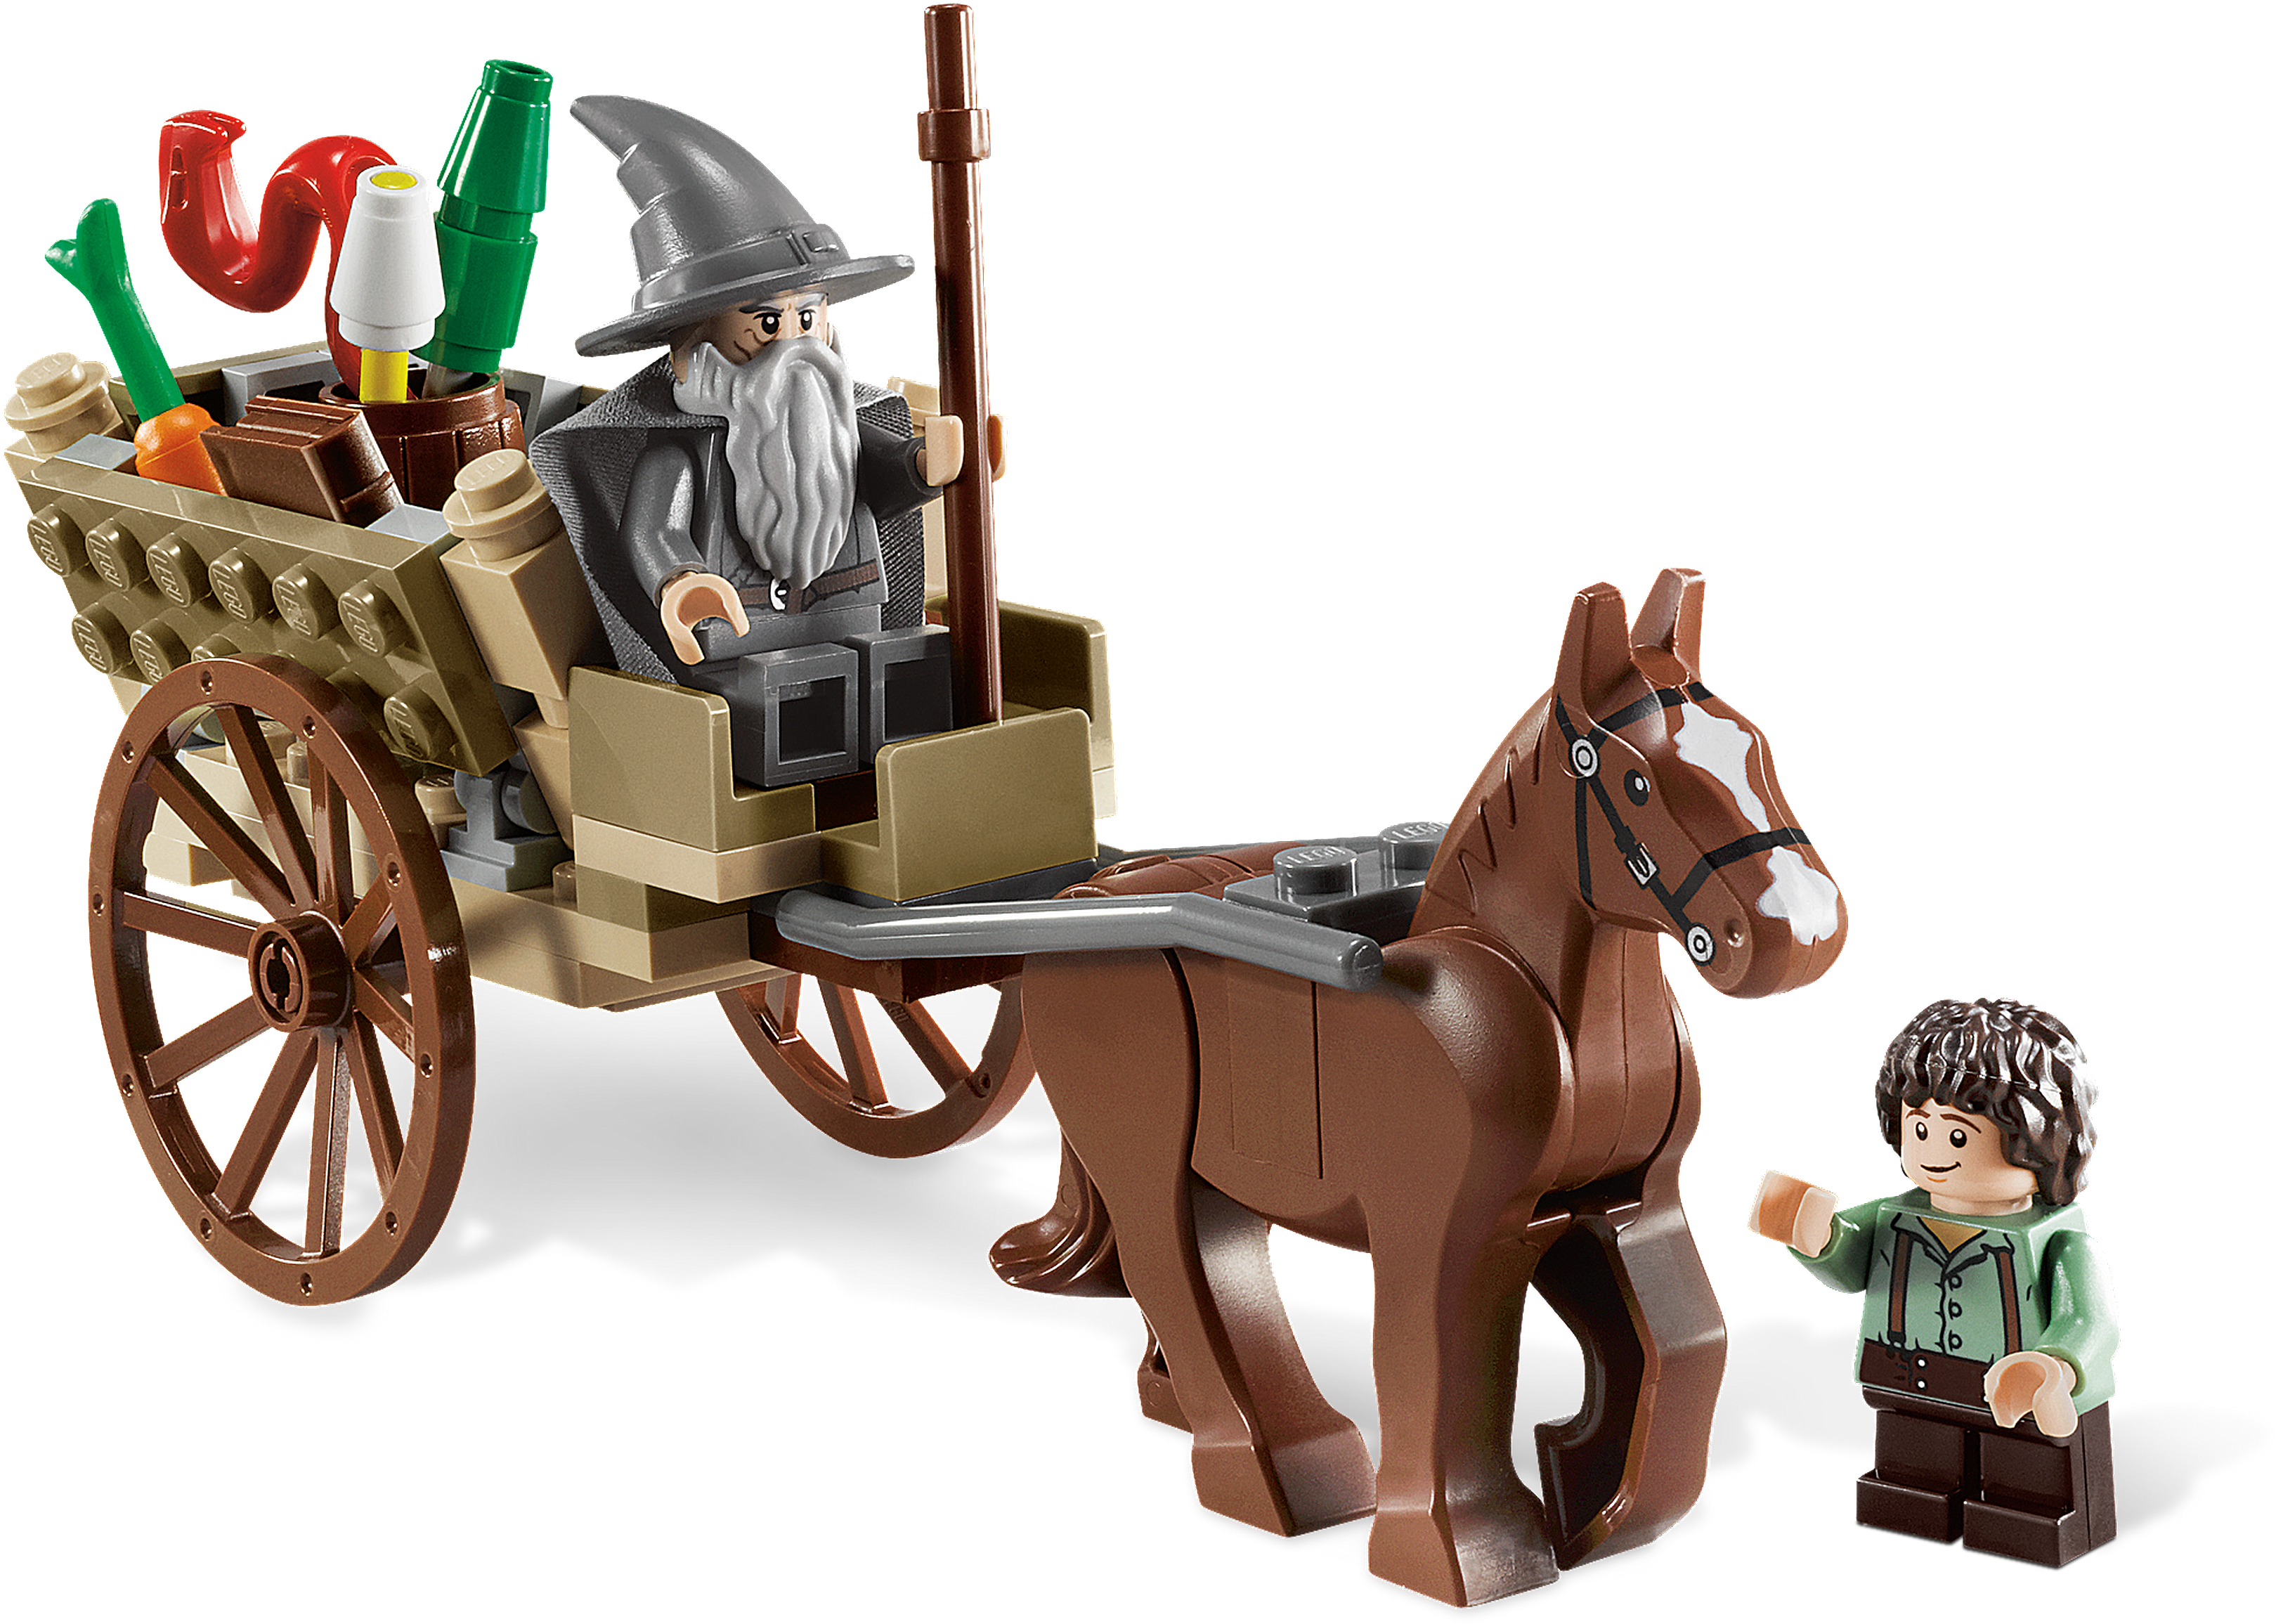 A Lego Toy With A Man In A Hat And A Horse Drawn Carriage